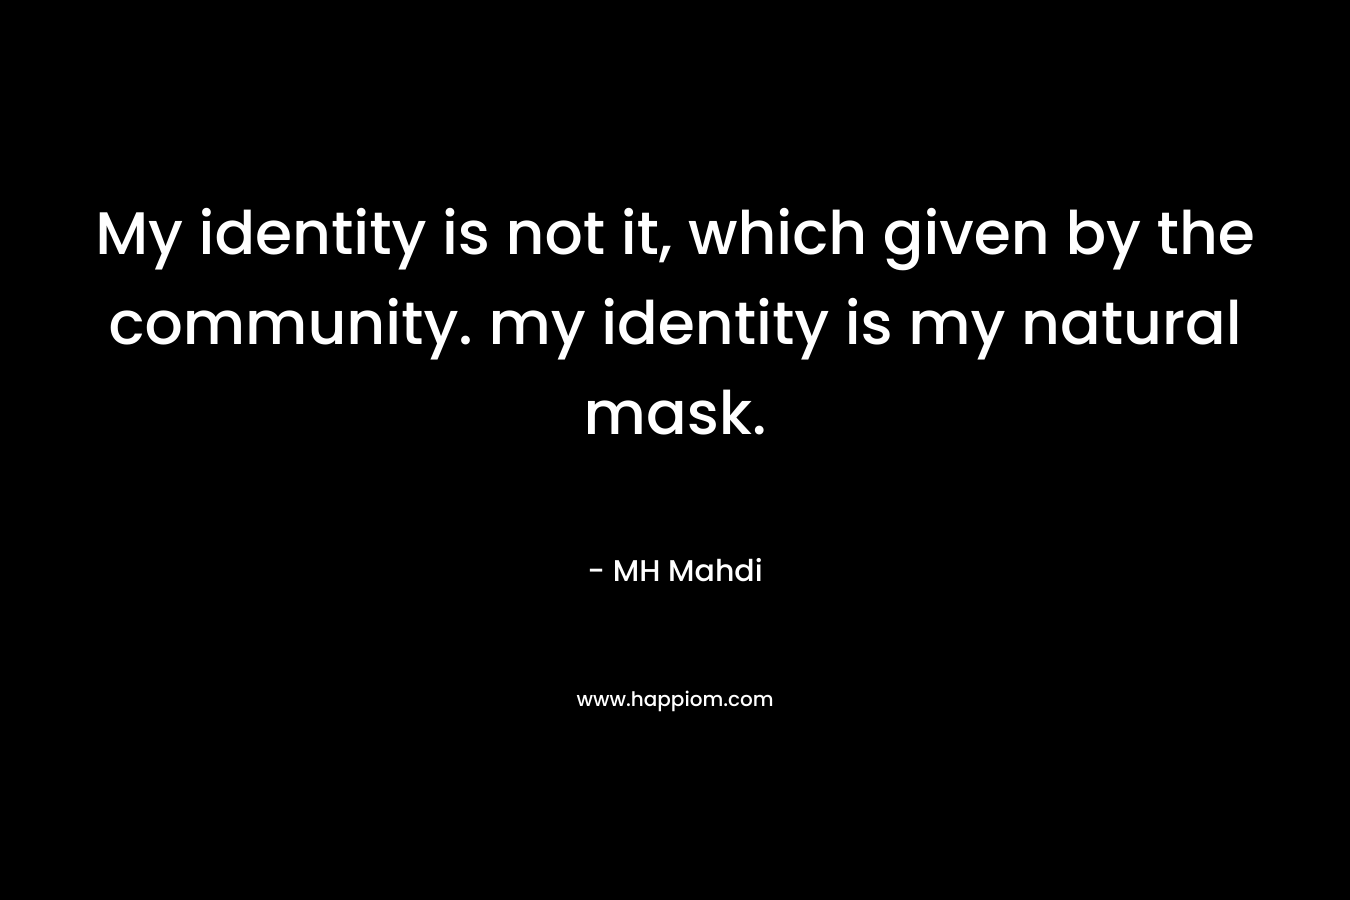 My identity is not it, which given by the community. my identity is my natural mask. – MH Mahdi